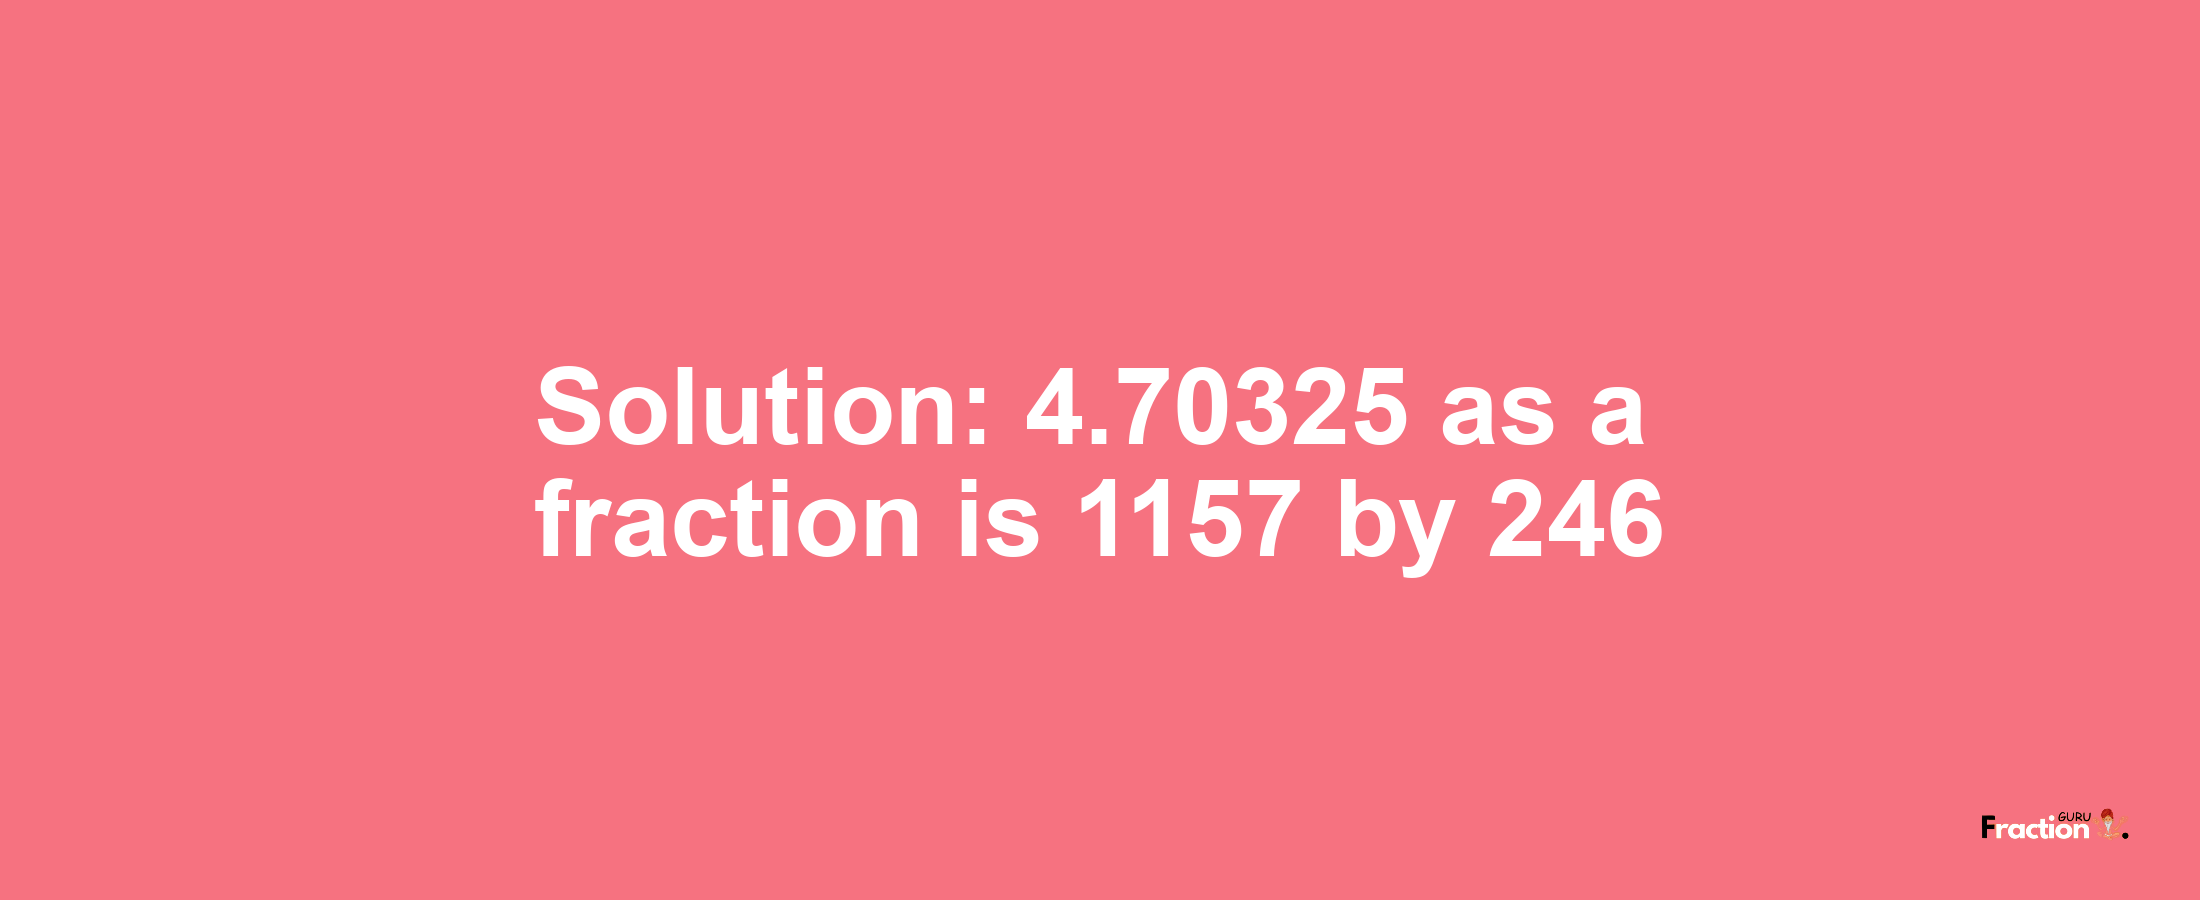 Solution:4.70325 as a fraction is 1157/246